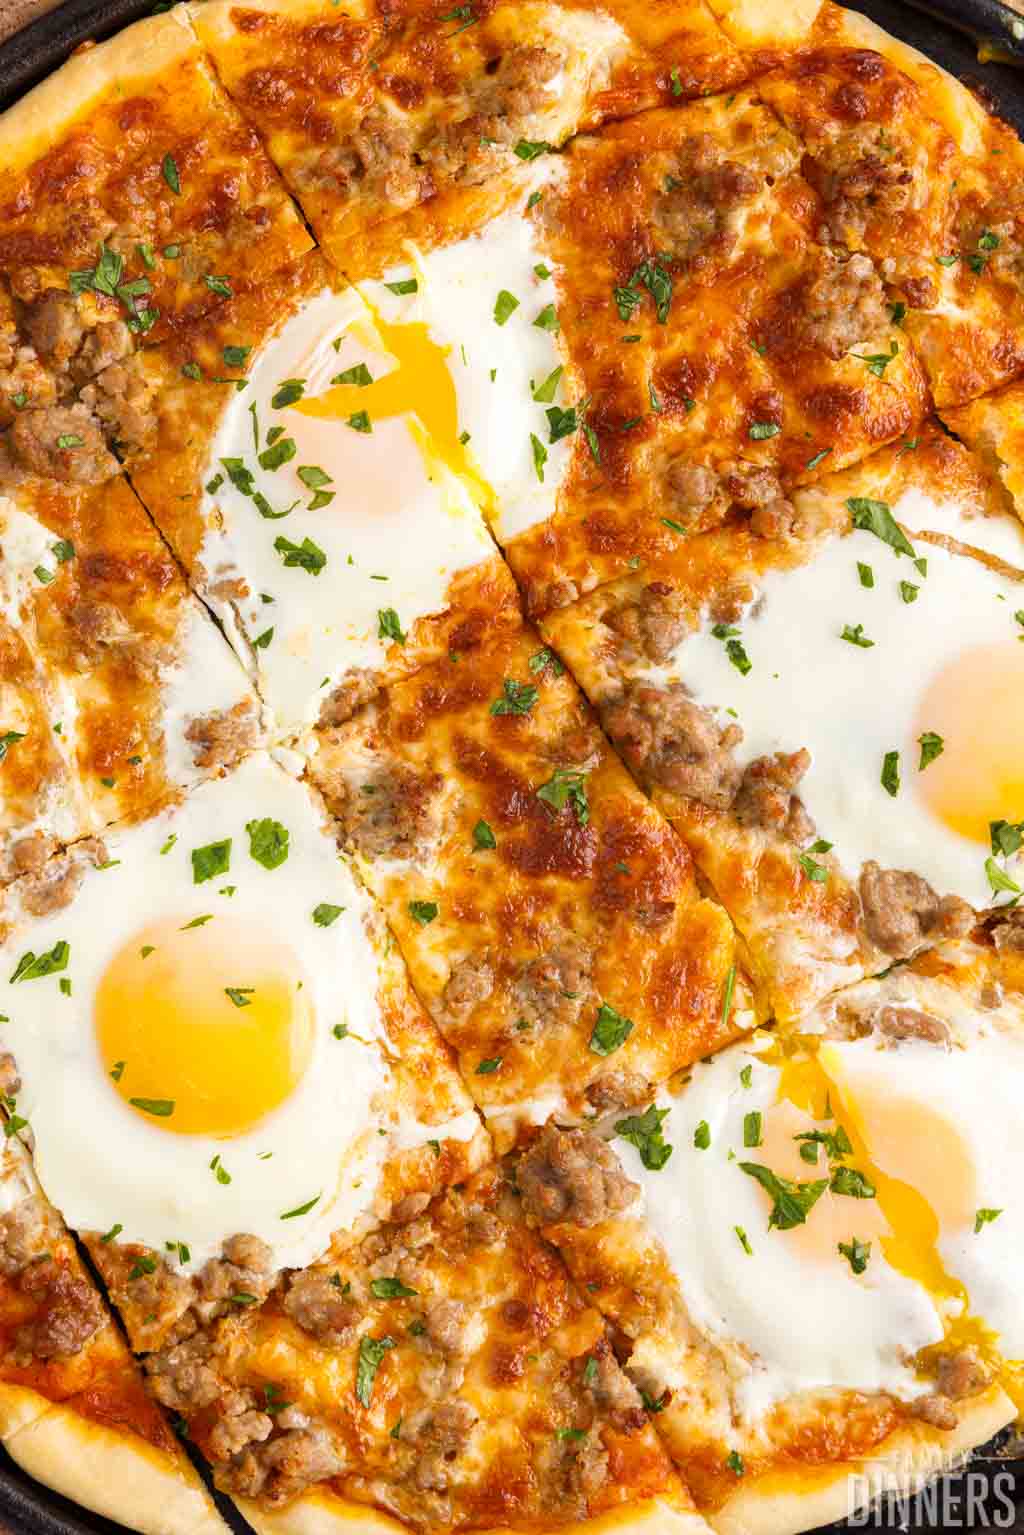 Sliced sausage breakfast pizza with sunny side up egg on top.